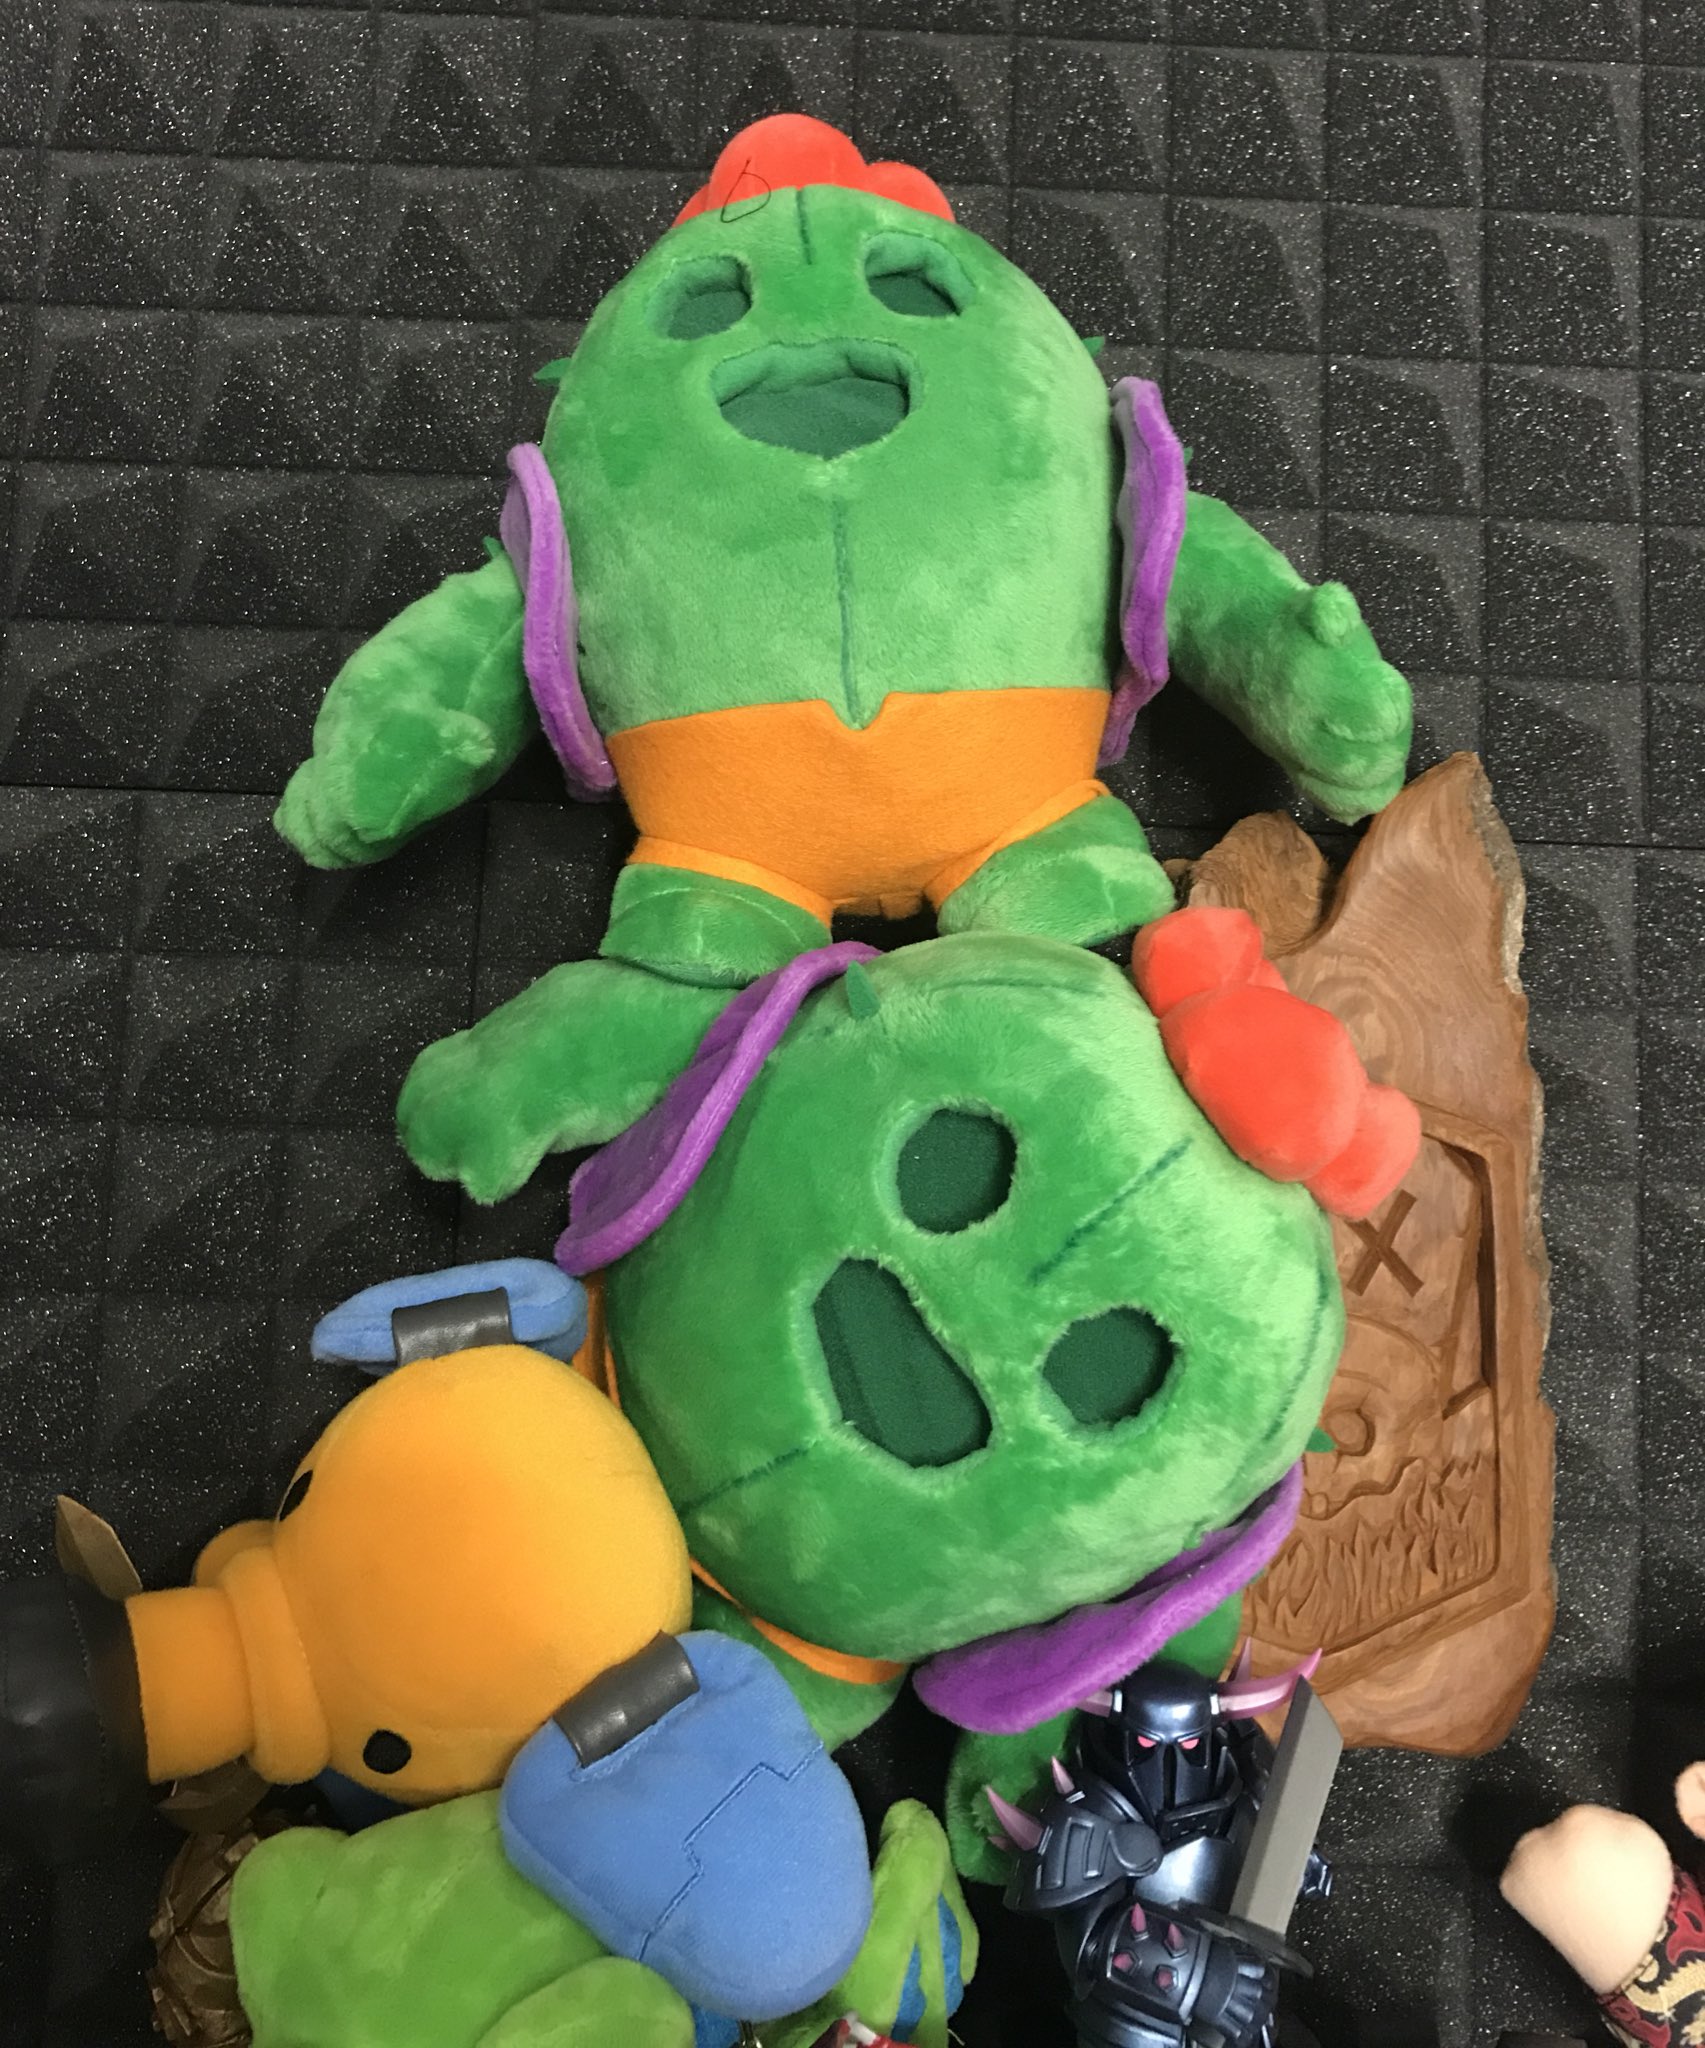 Ben Timm on X: Giving away one of these Spike Plushies